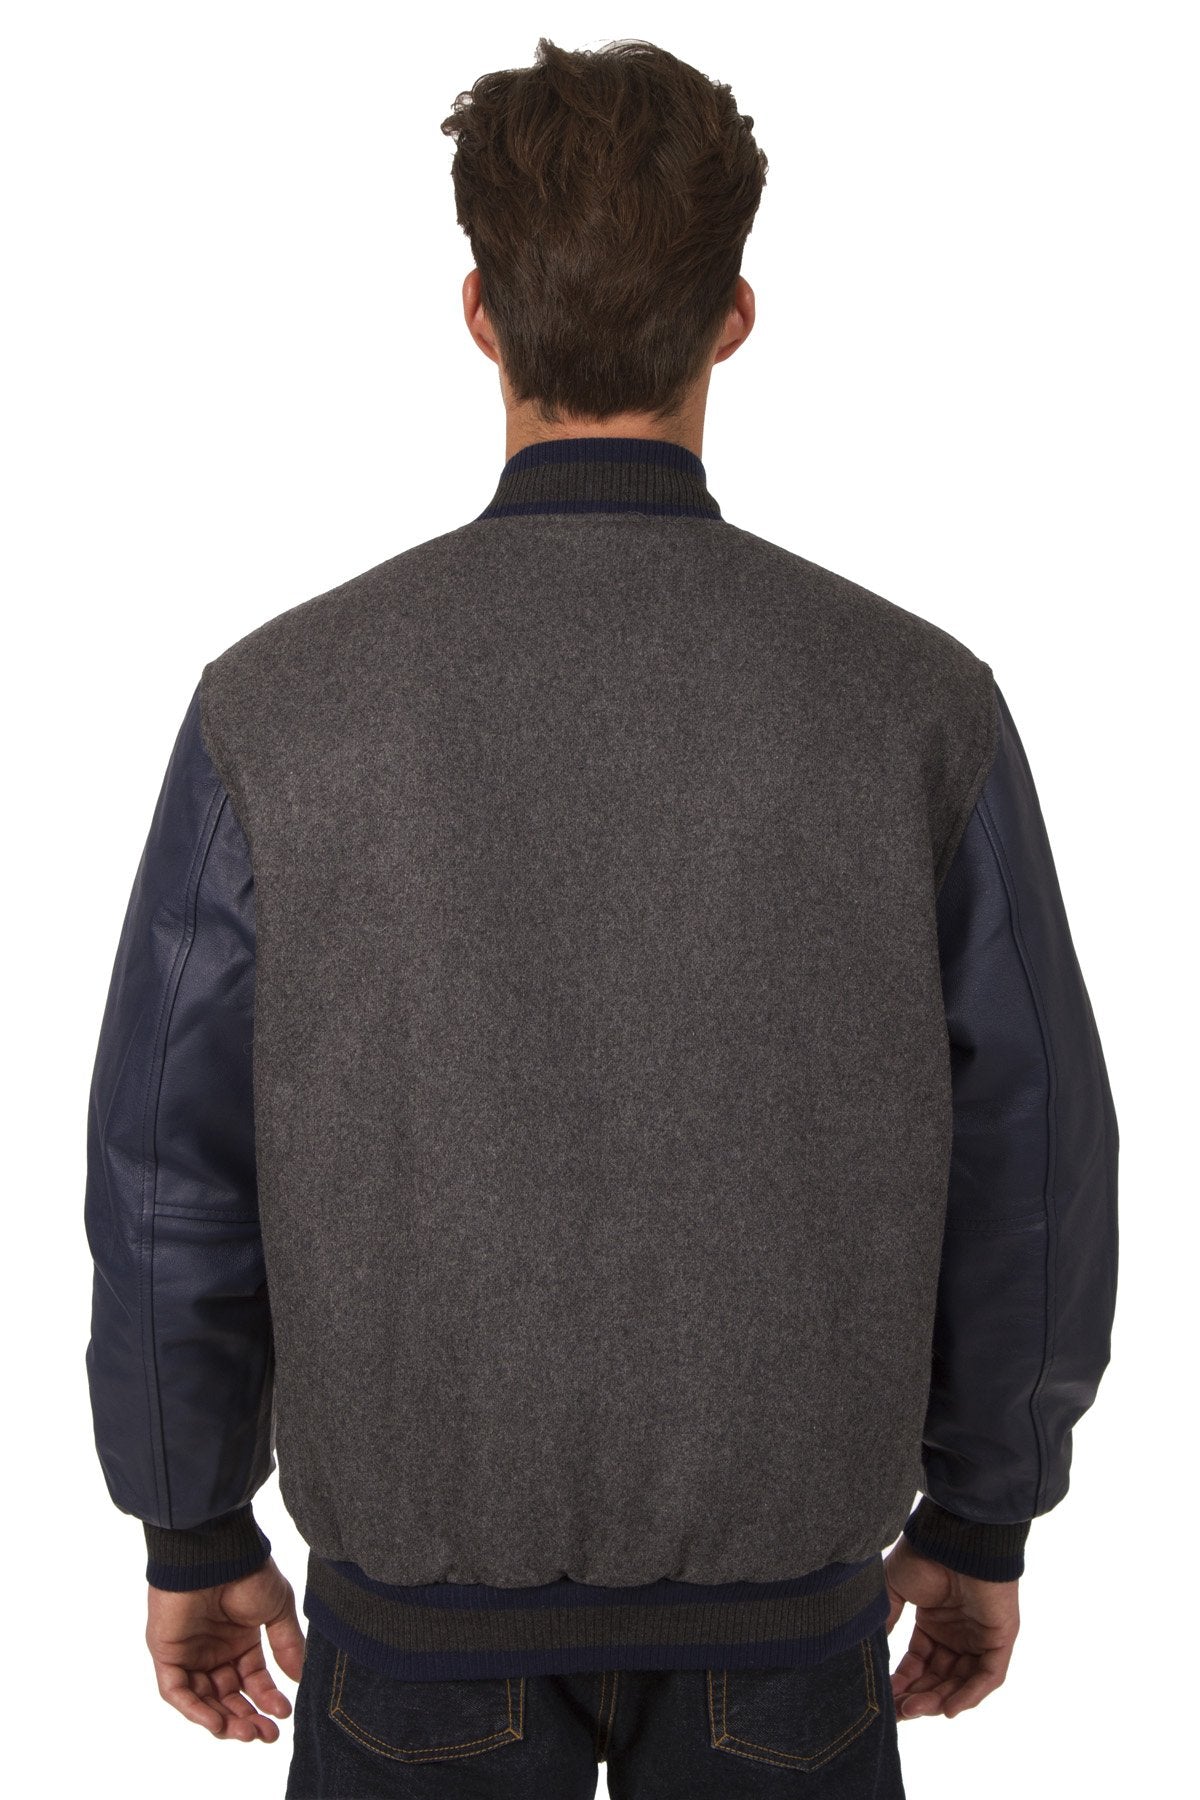 JH Design - Wool and Leather Varsity Jacket - Reversible - Charcoal ...